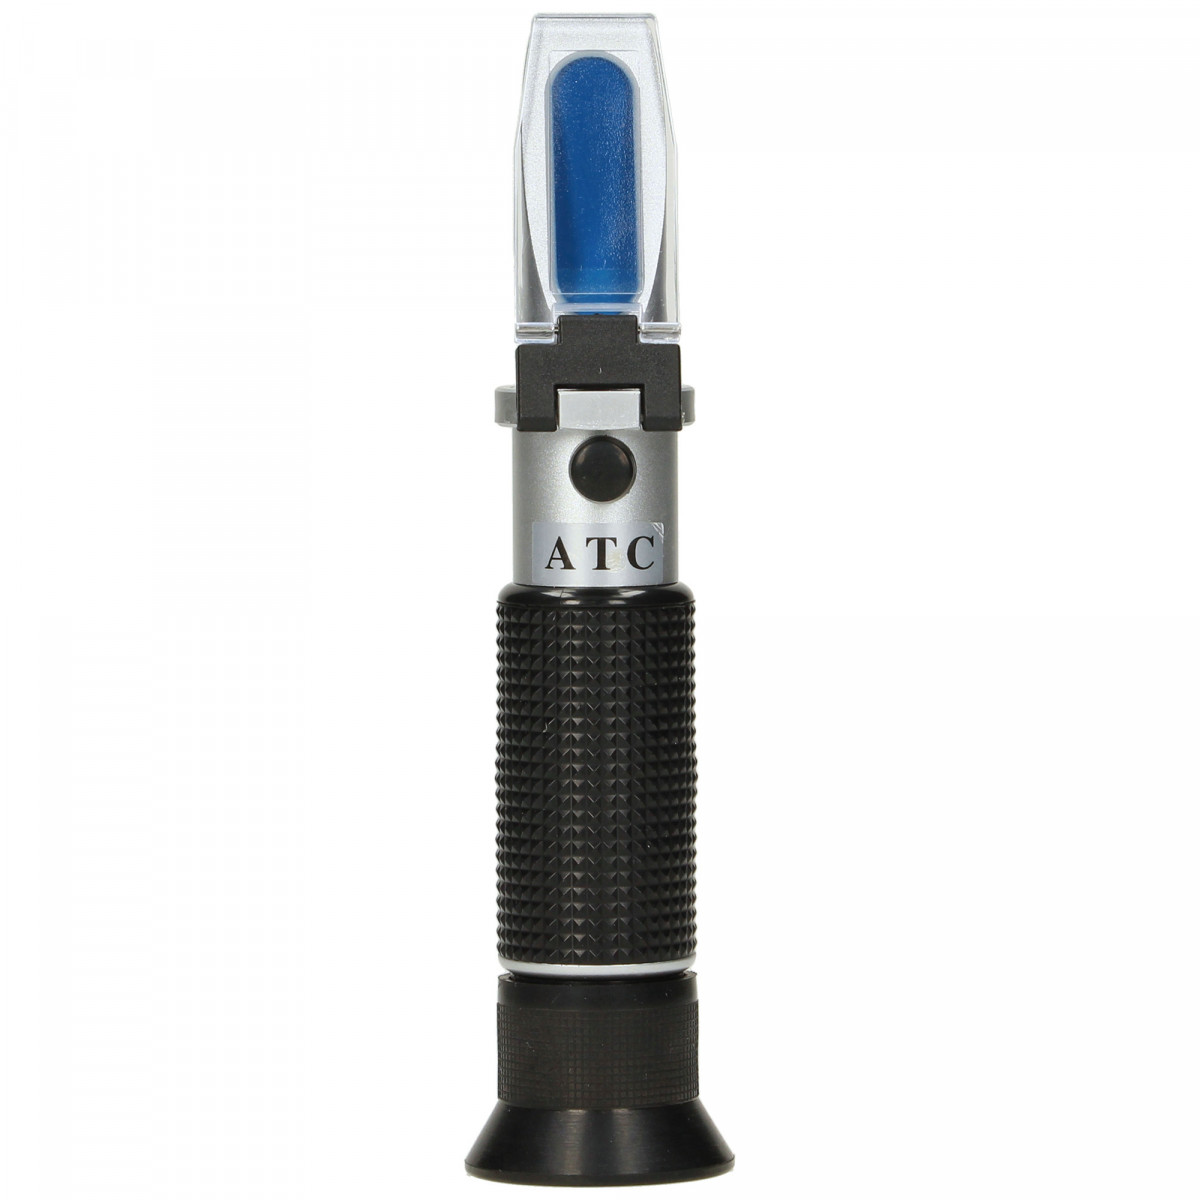 Refractometer 0-32% Brix + 1.000-1.130 specific gravity with ATC